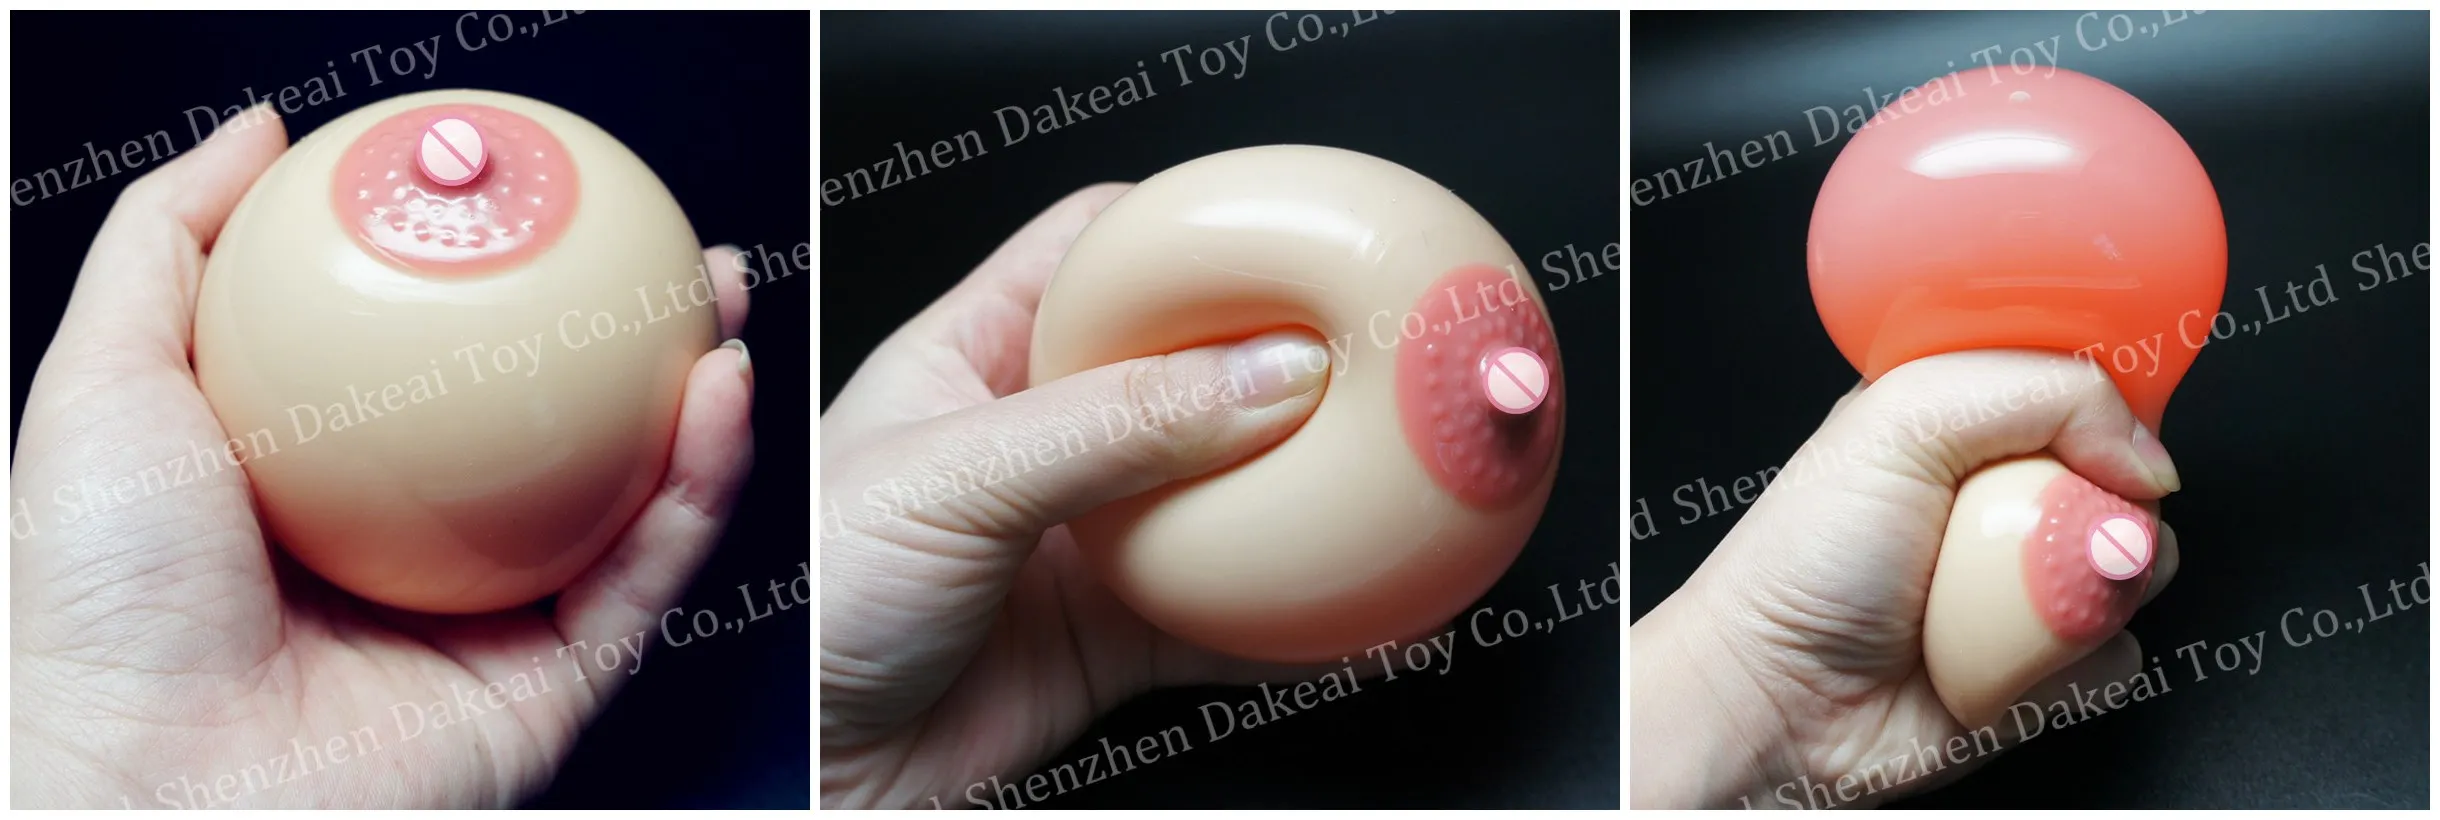 Soft Rubber Vent Toy Squeeze Breast Boob Ball Stress Anxiety Reliever Hot Sale 